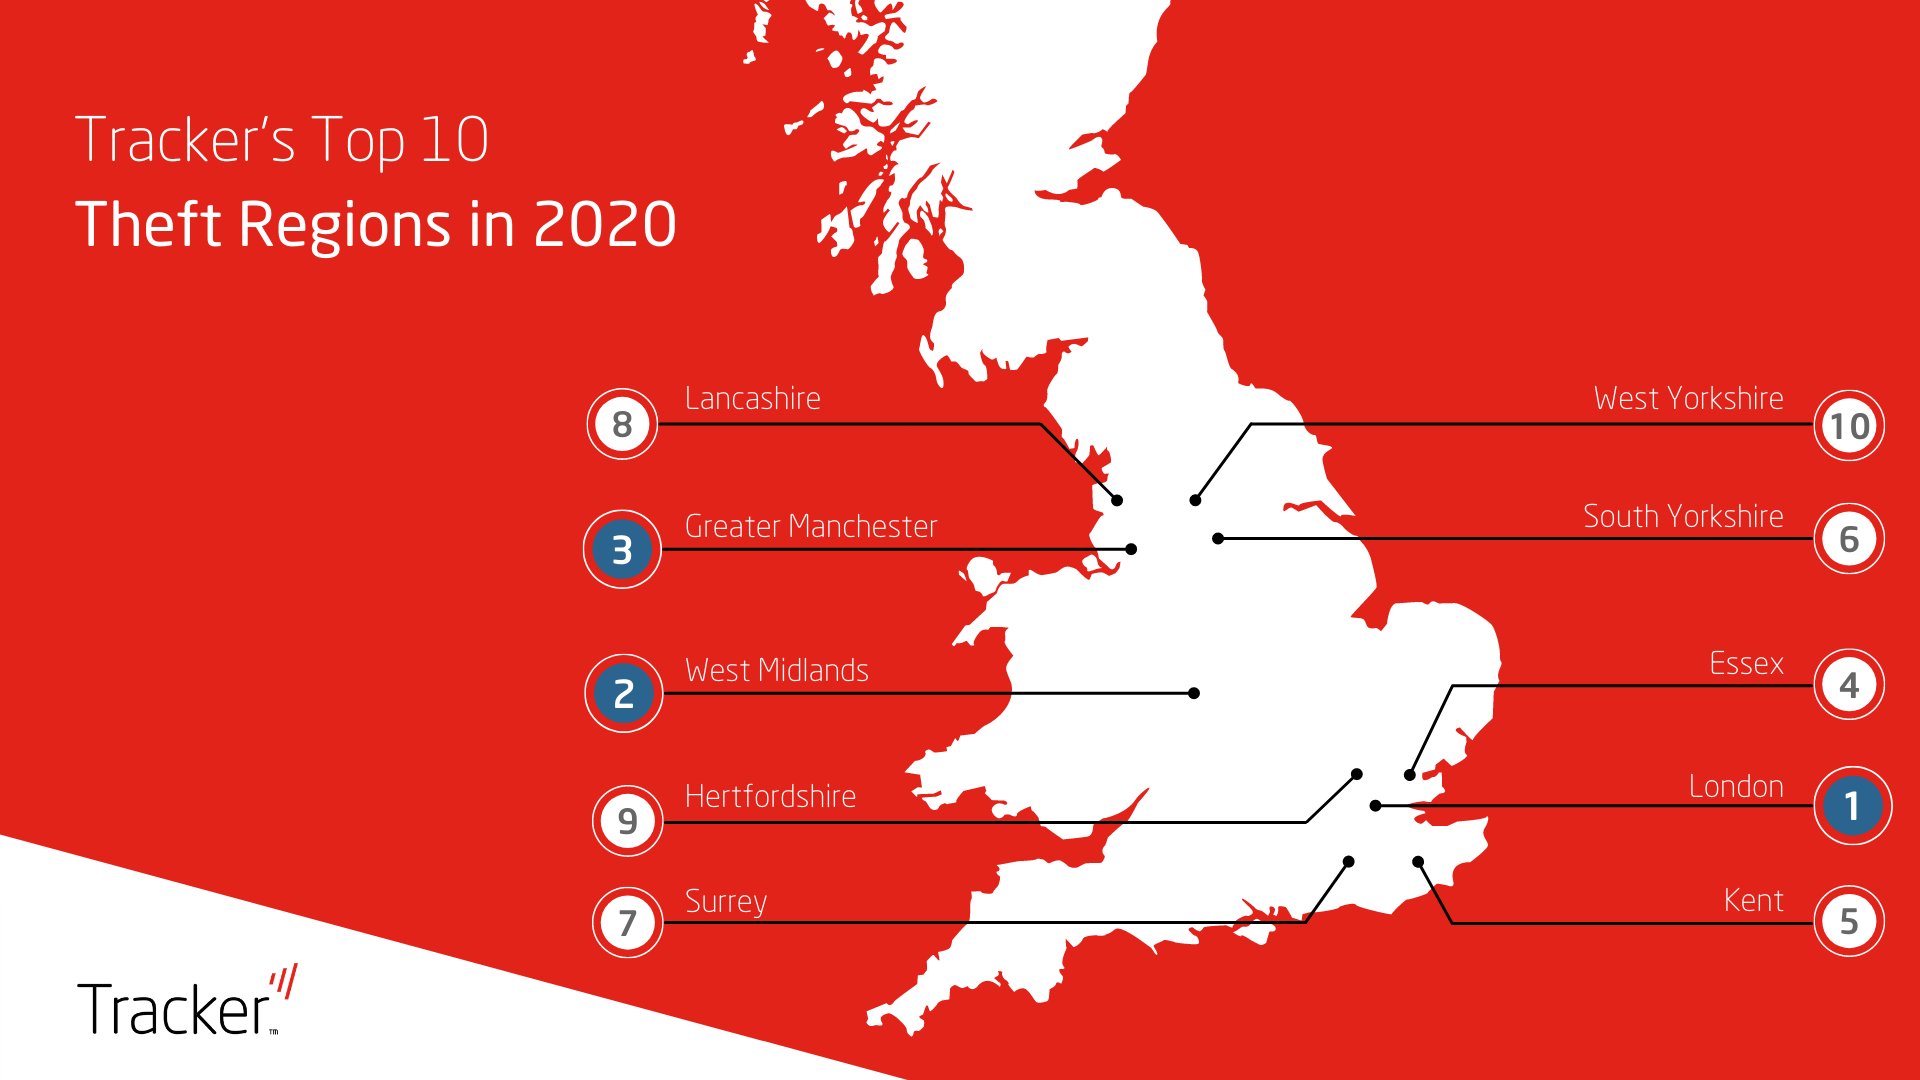 Trackers Top 10 Theft Regions in 2020